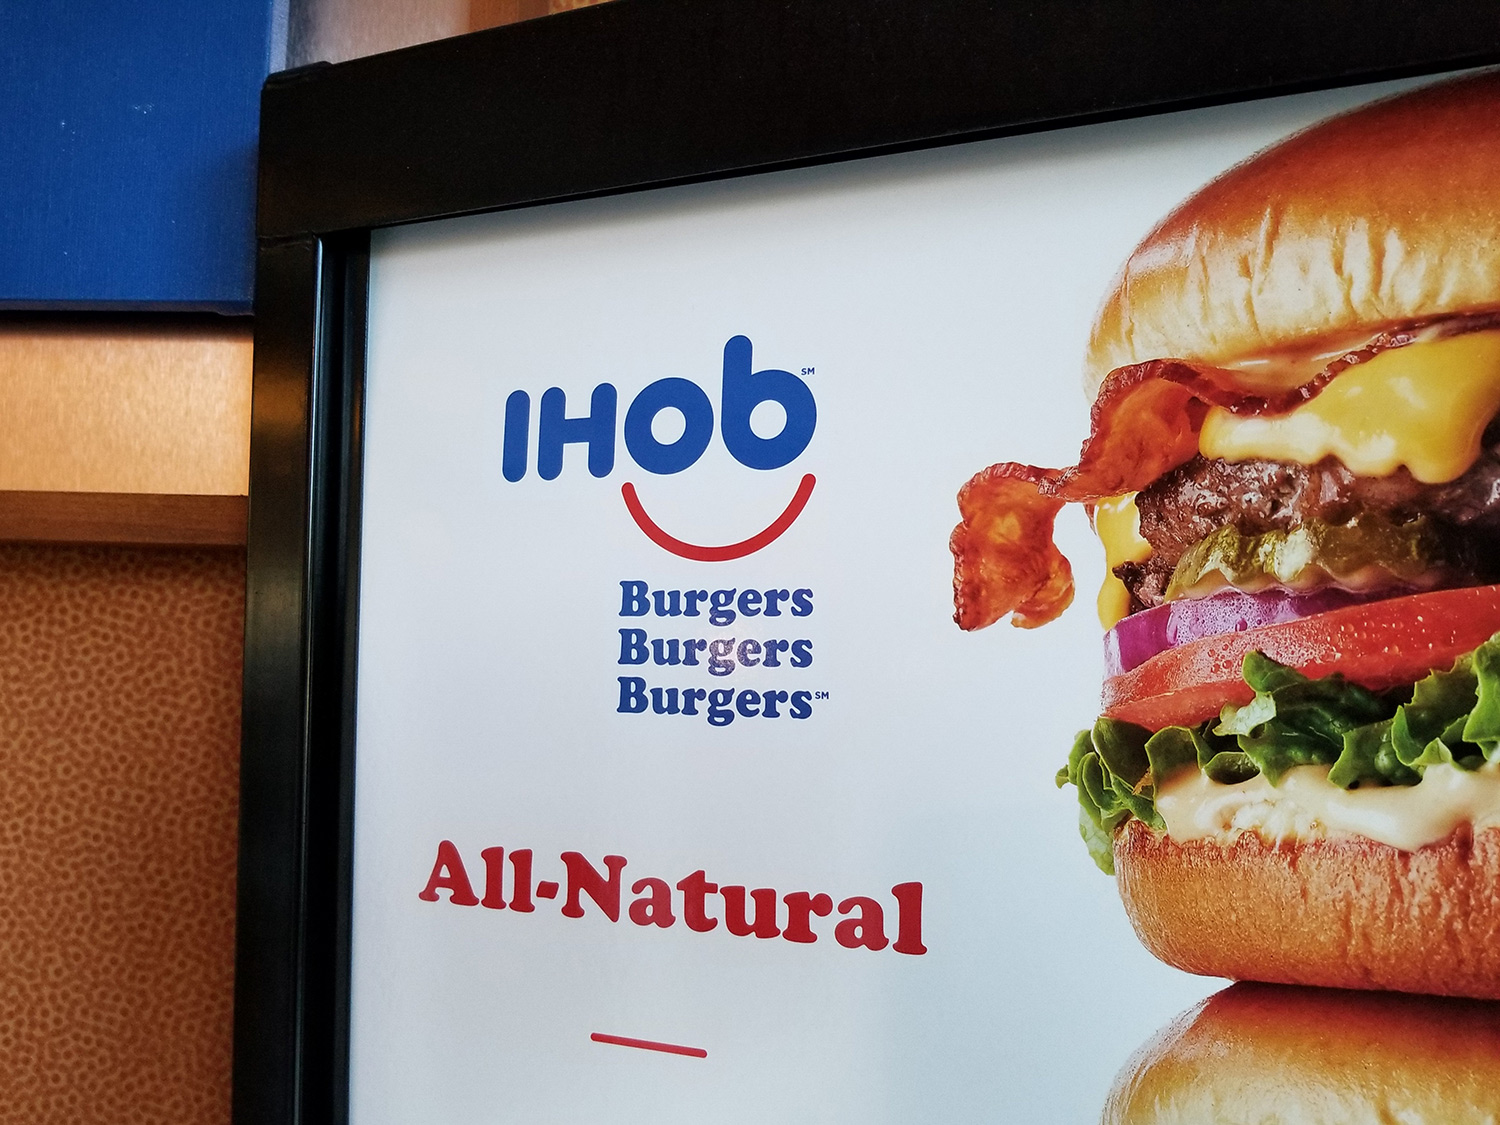 IHOP Promotes Burgers by 'Changing' Name to IHOb, Gets Reaction